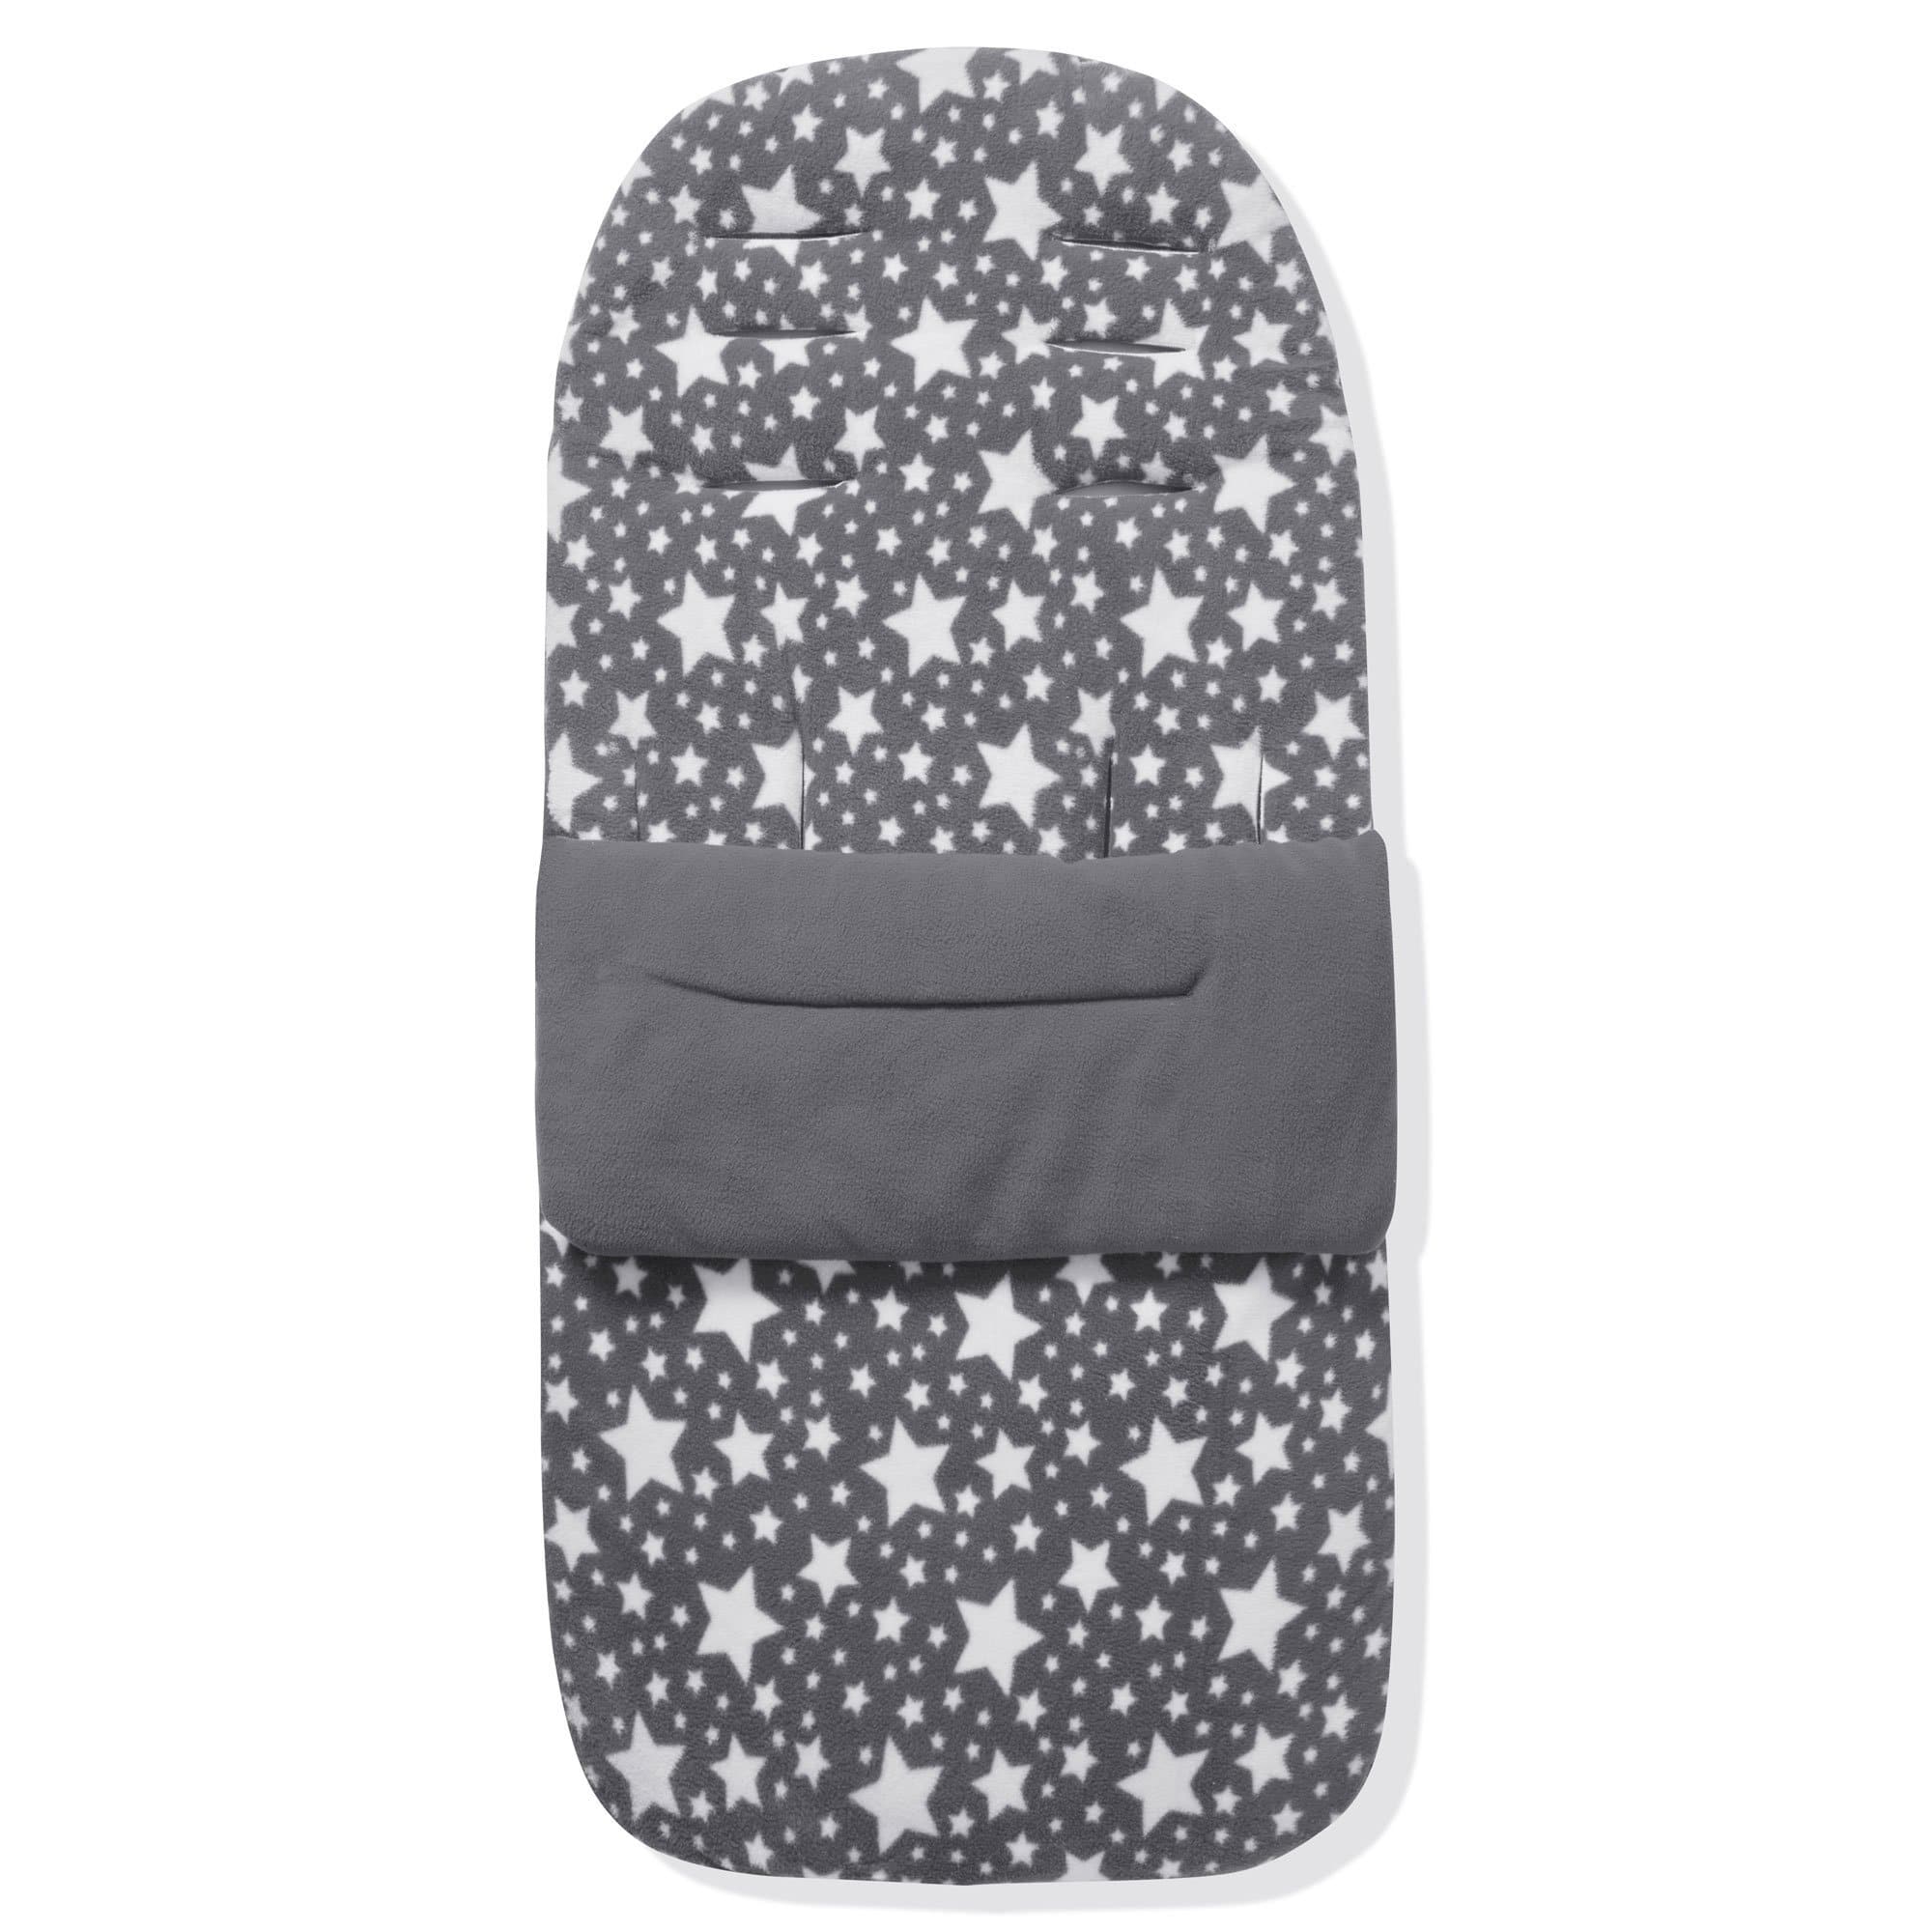 Fleece Footmuff / Cosy Toes Compatible with Mountain Buggy - Grey Star / Fits All Models | For Your Little One